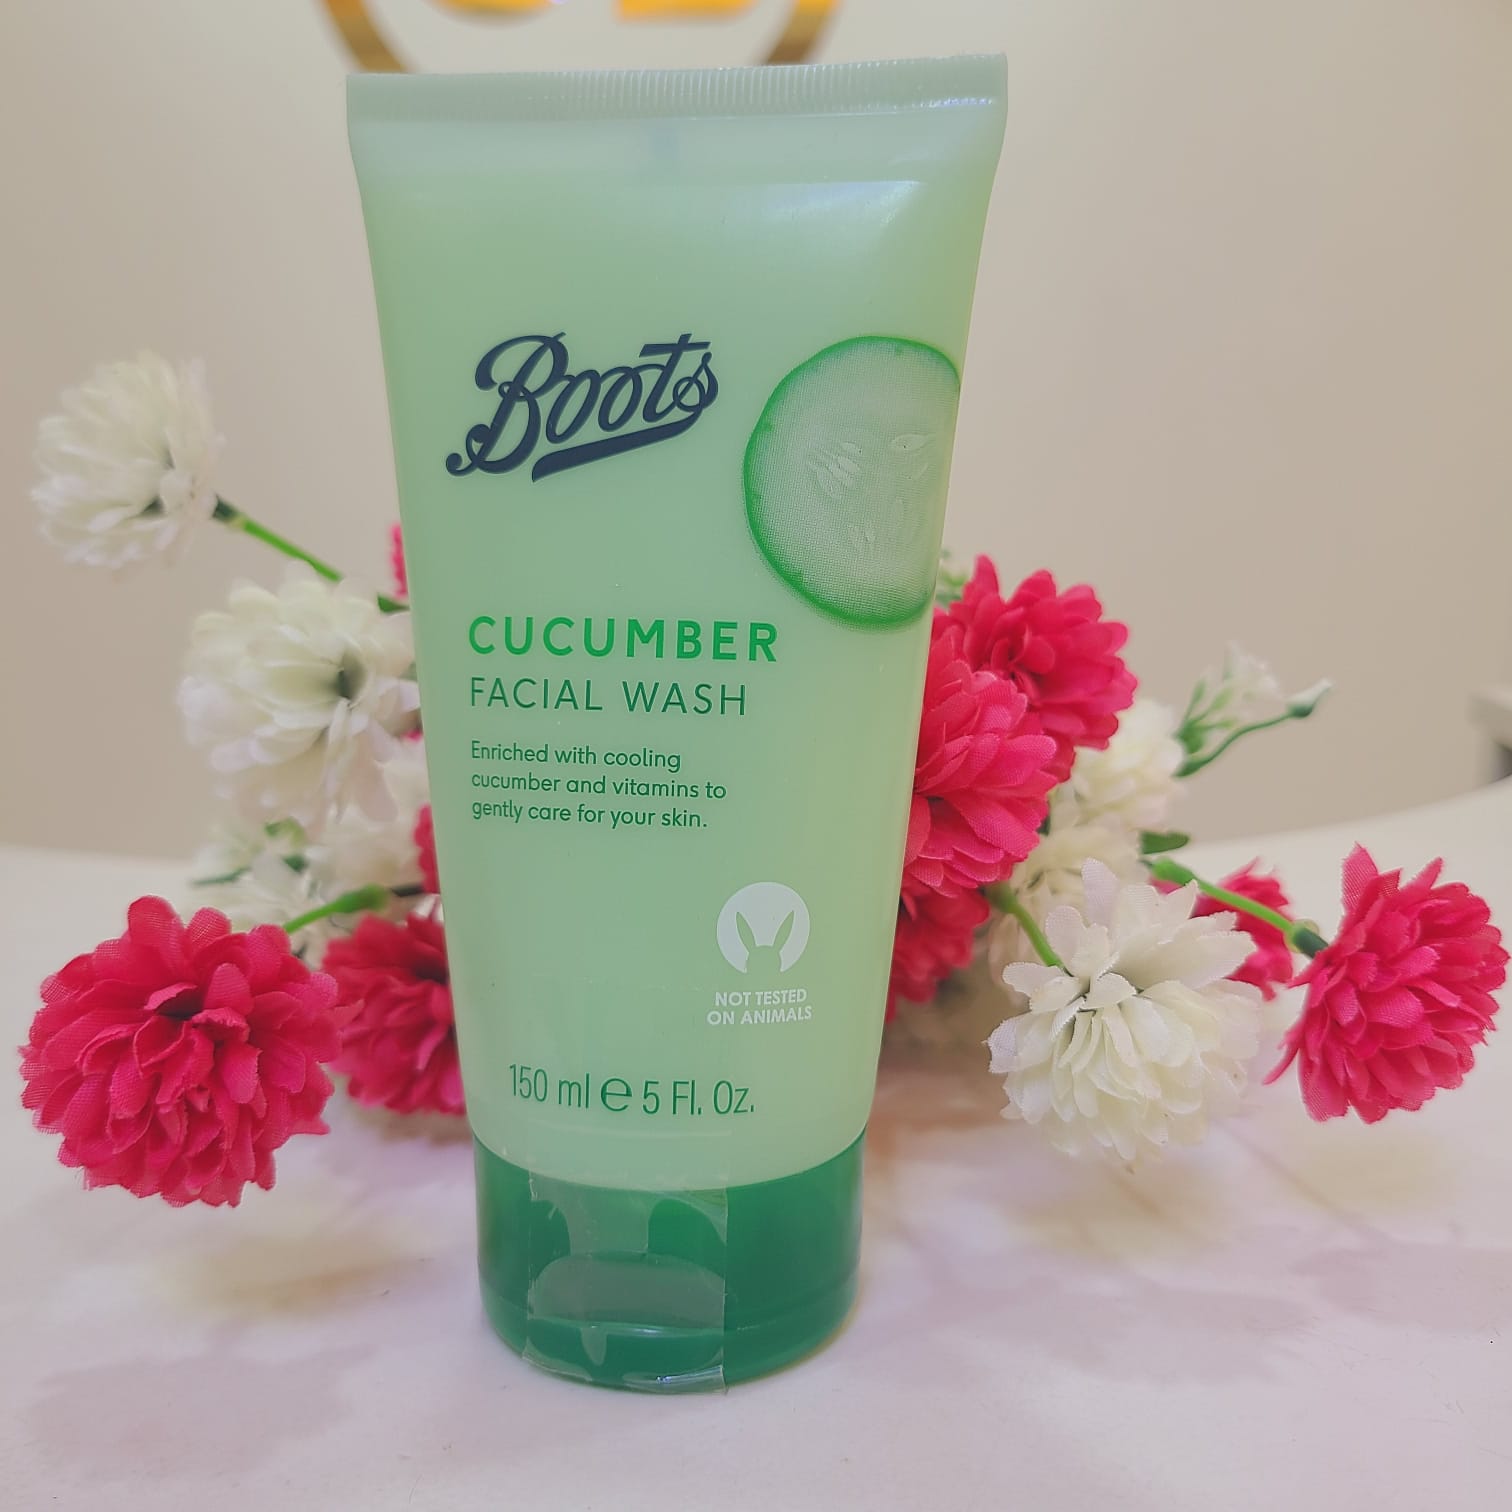 boots travel face wash